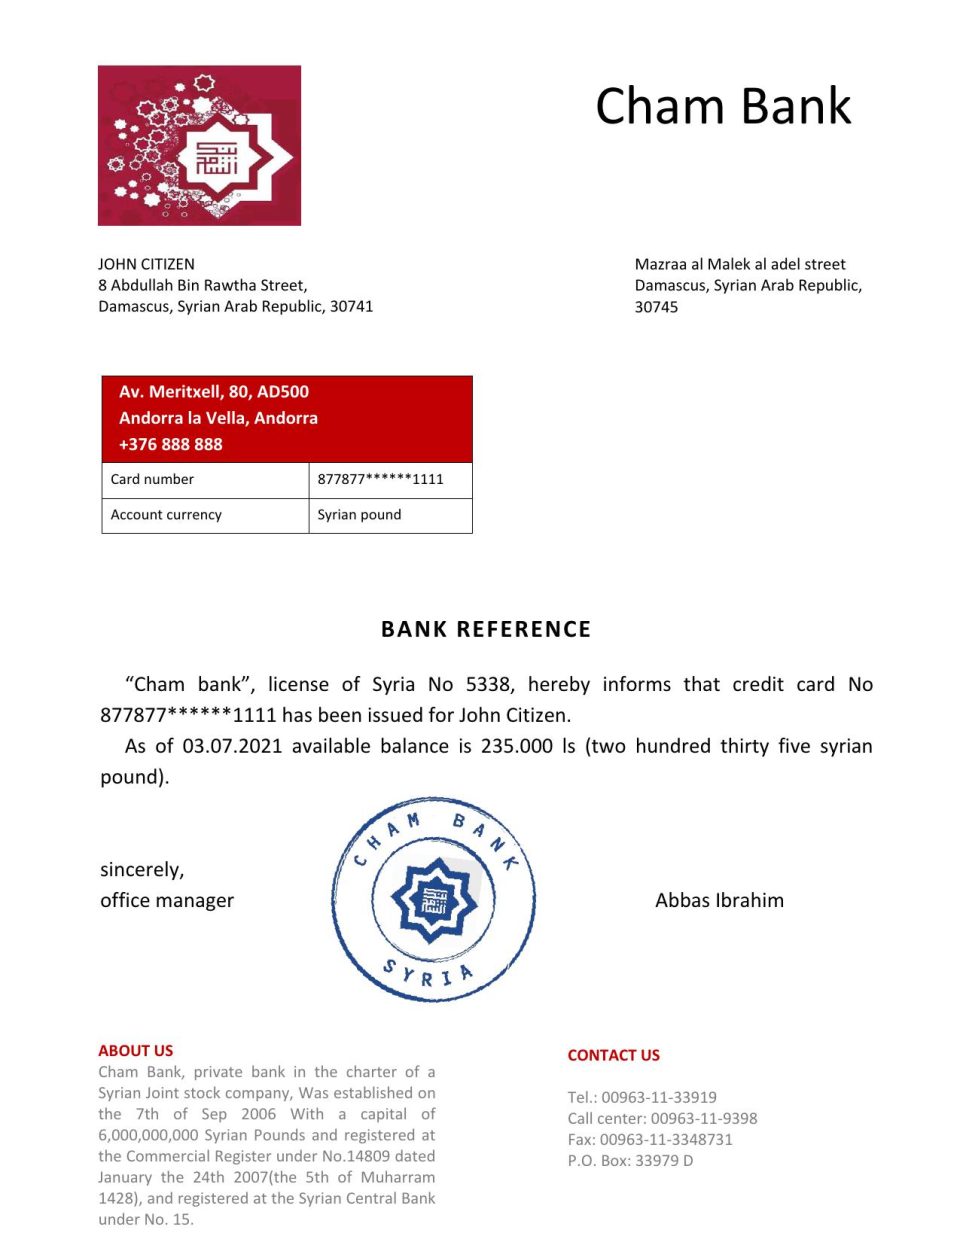 Download Syria Cham Bank Reference Letter Templates | Editable Word